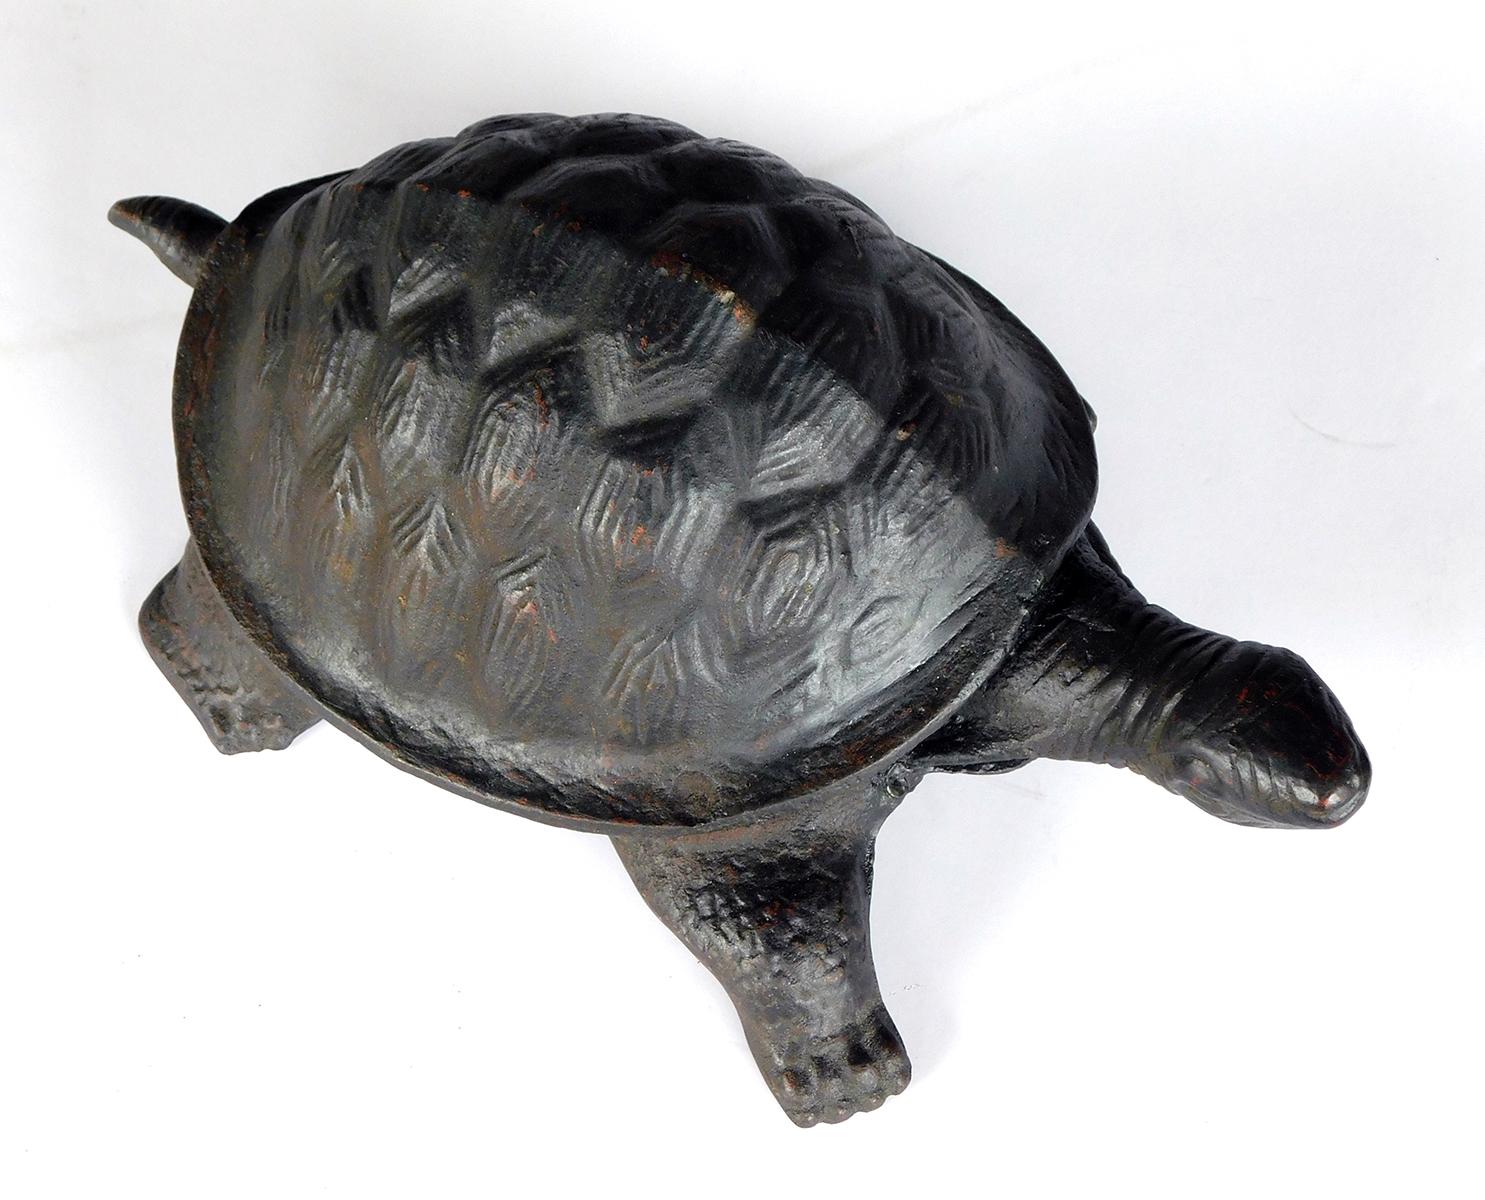 The expressive turtle with head gazing upwards; with well-delineated shell.